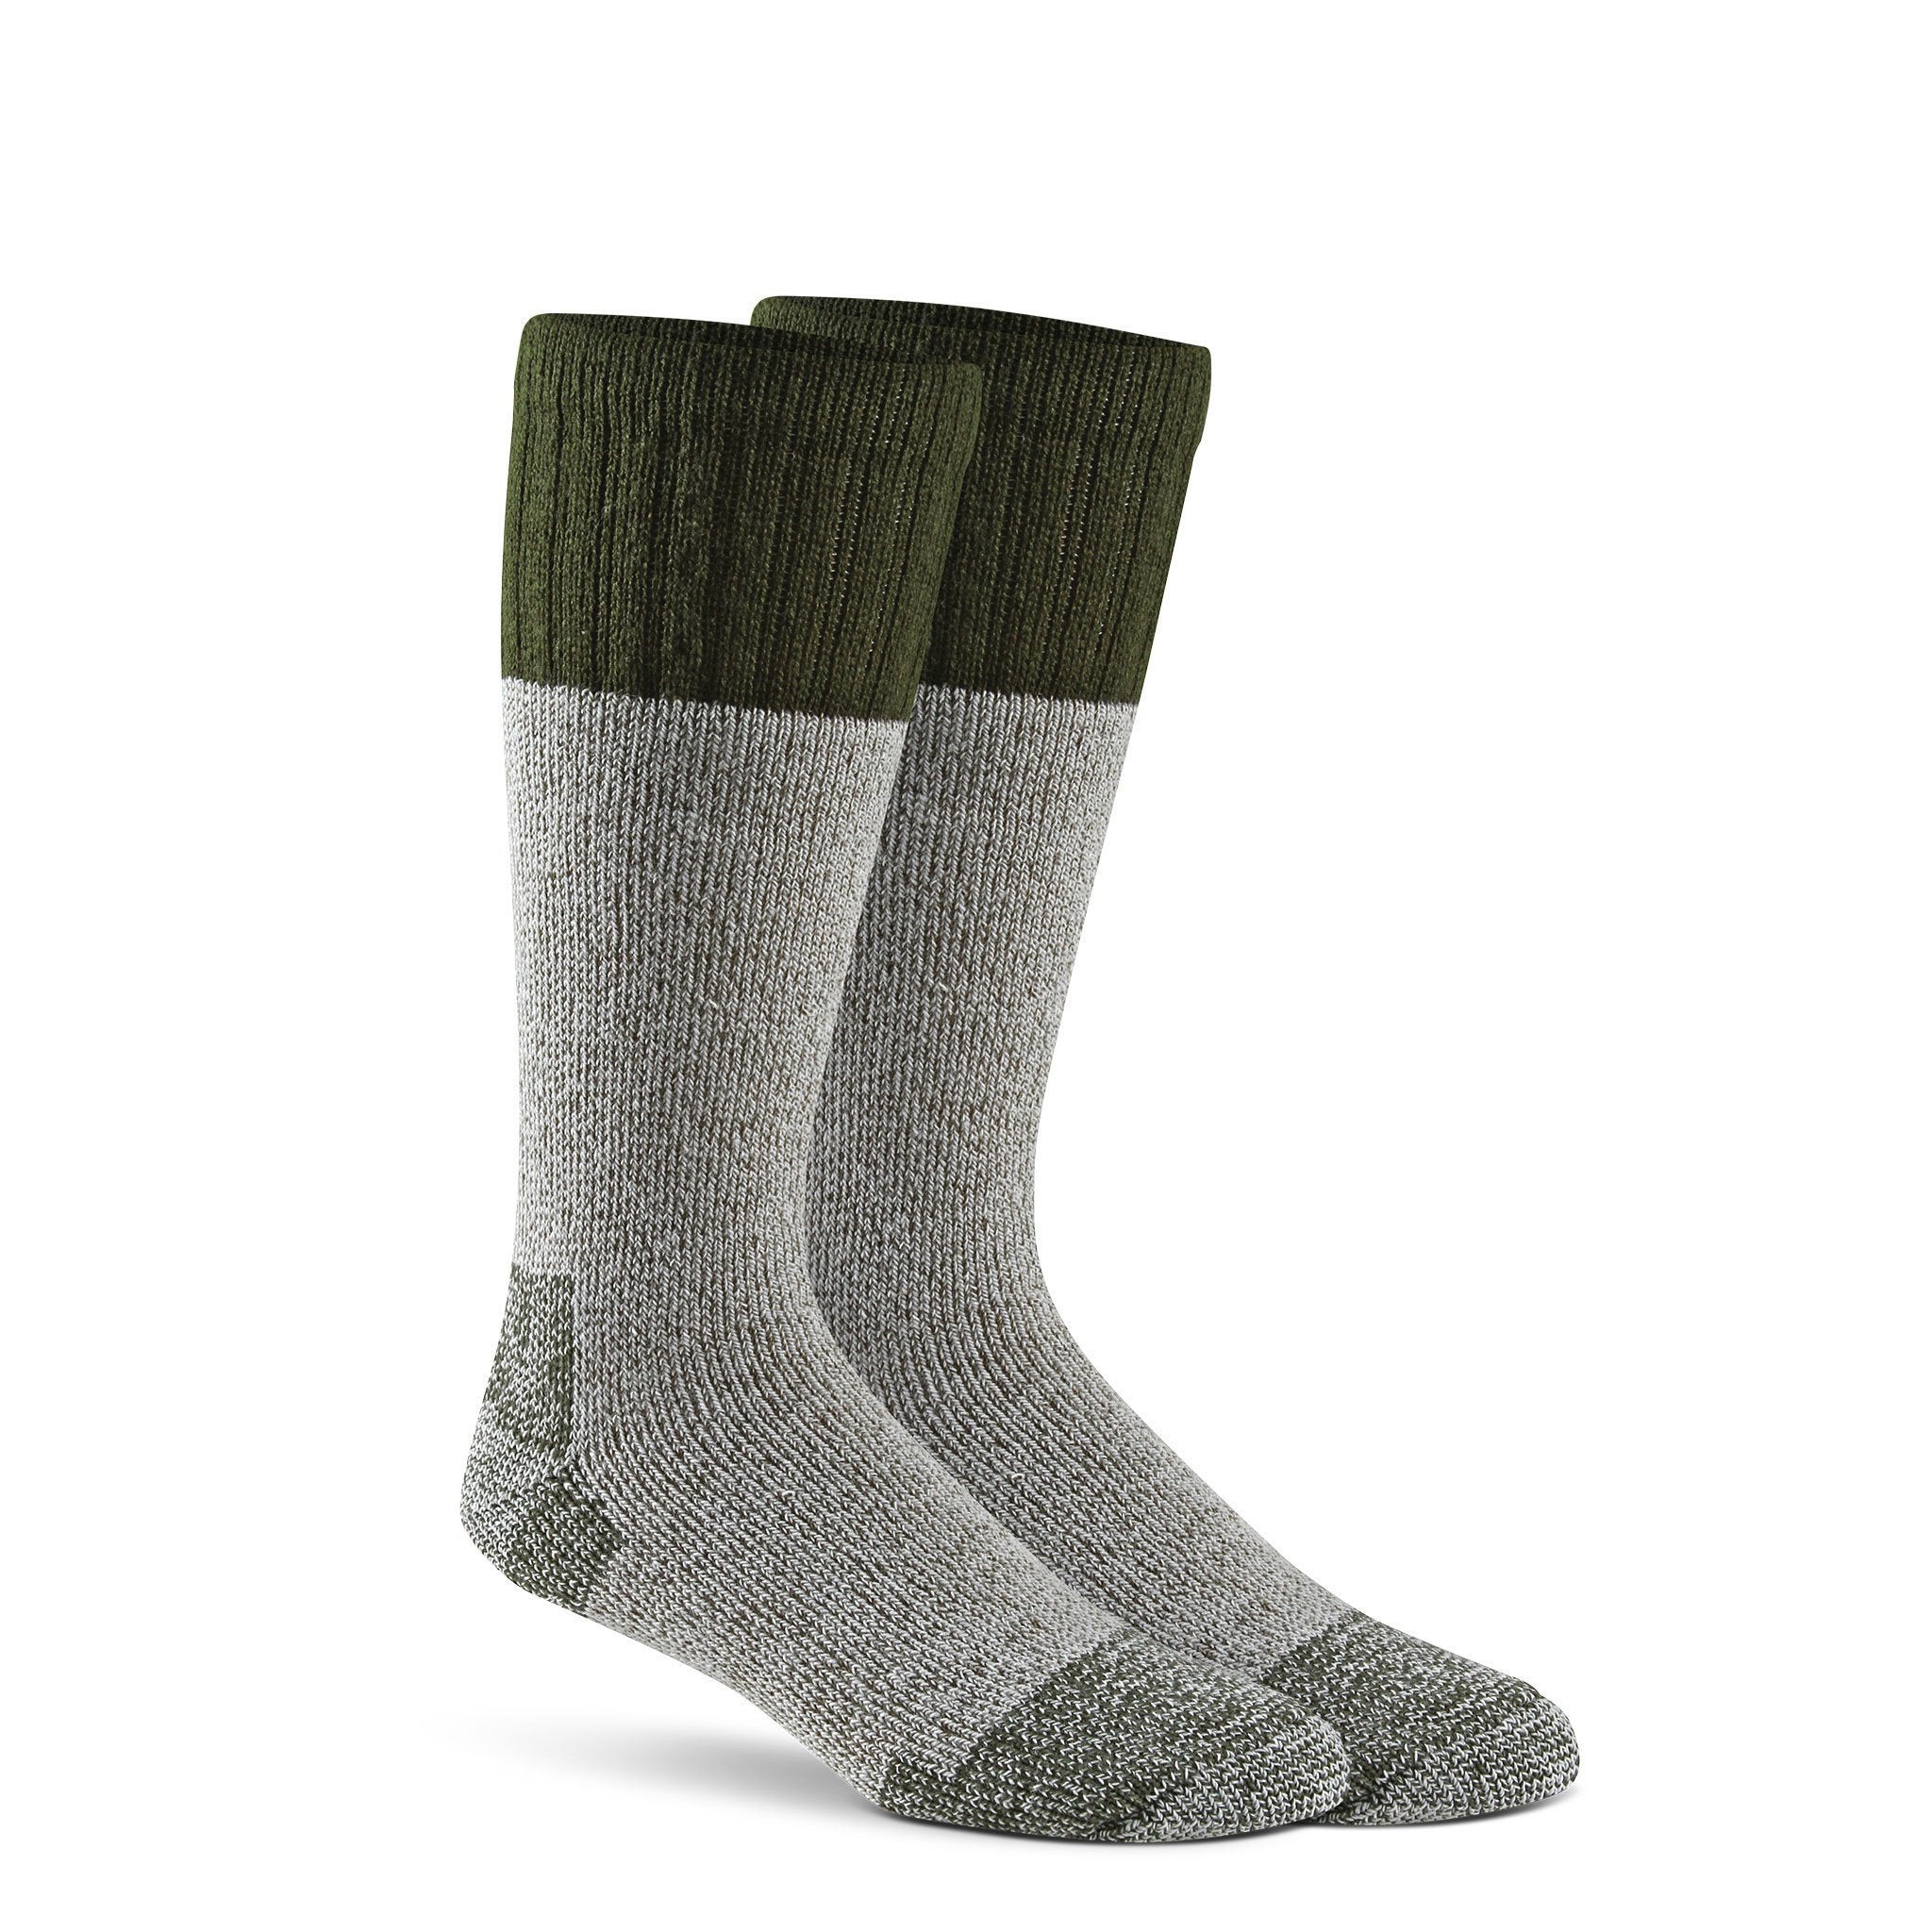 Fox River 7586 Wick Dry Outlander Heavyweight Mid-Calf Boot Socks Olive Profile View